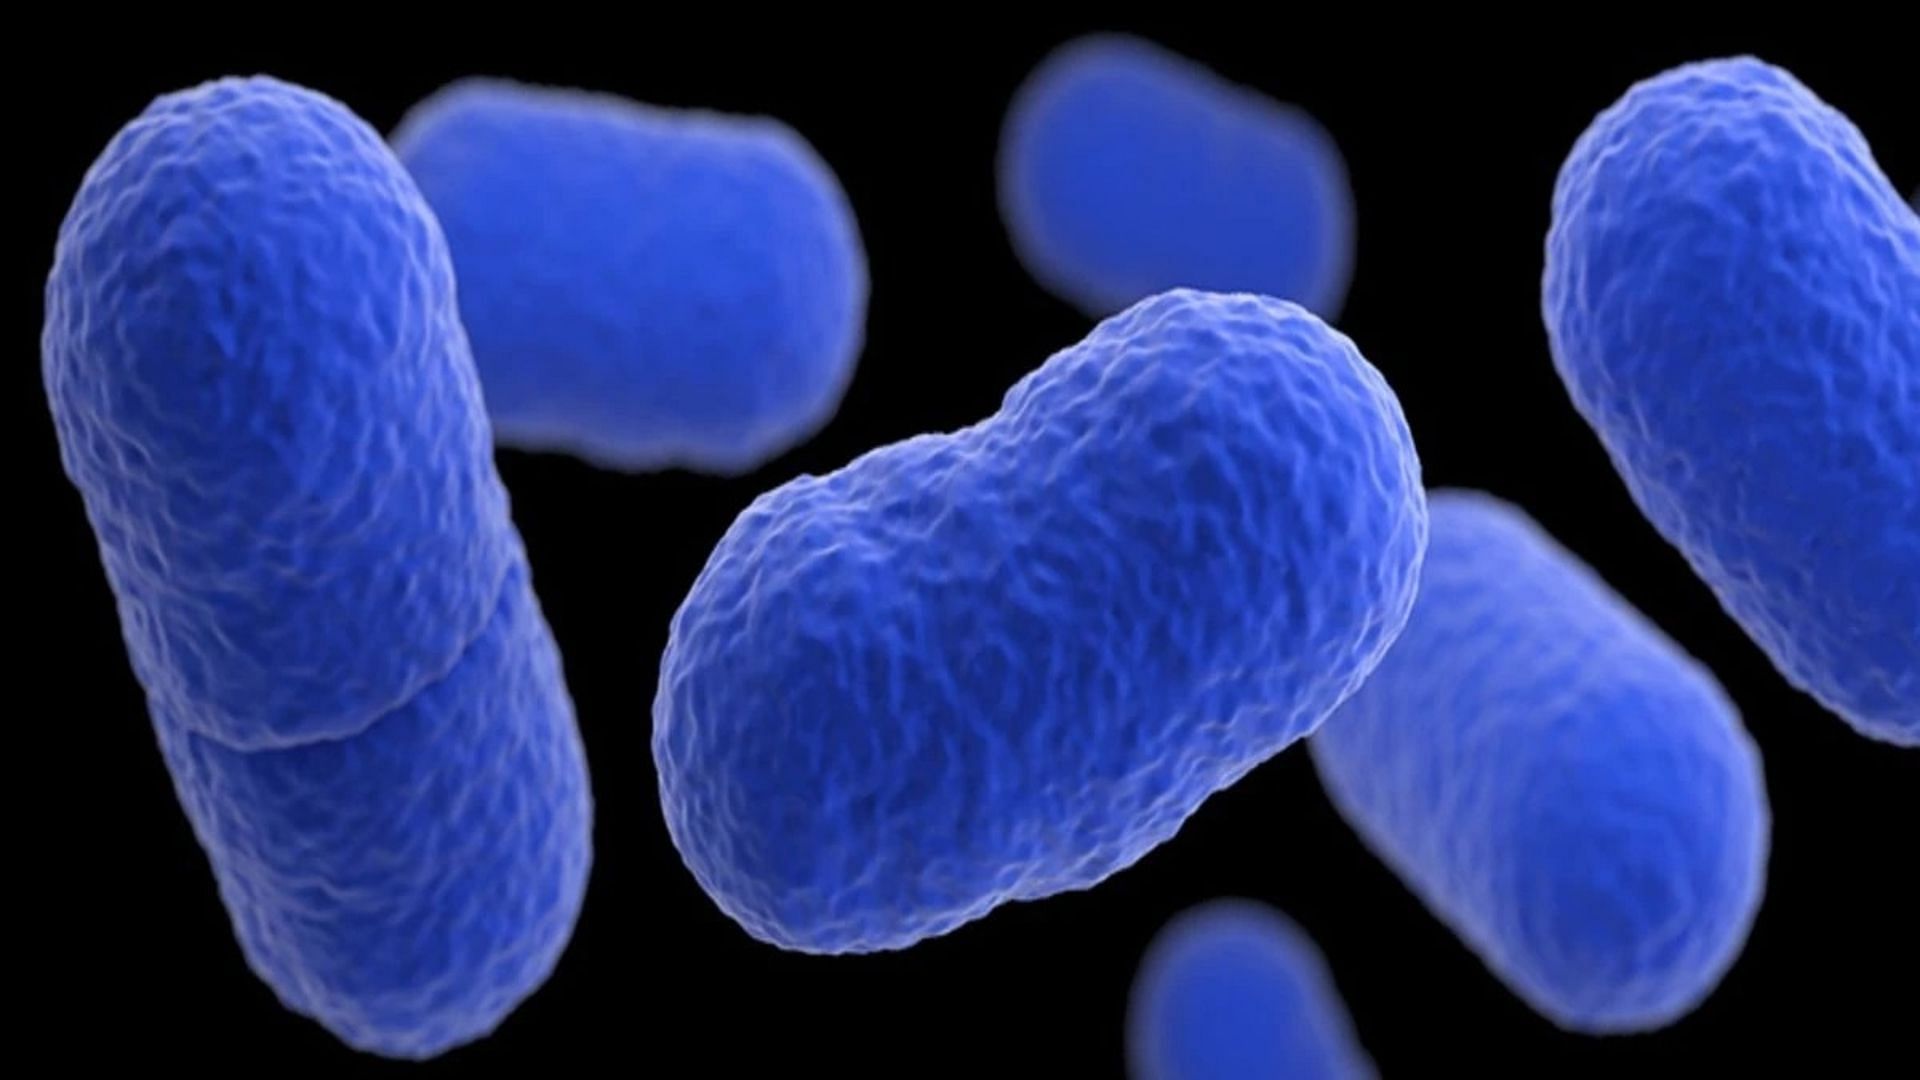 The microscopic representation of the bacteria that causes the infection (Image via CDC)